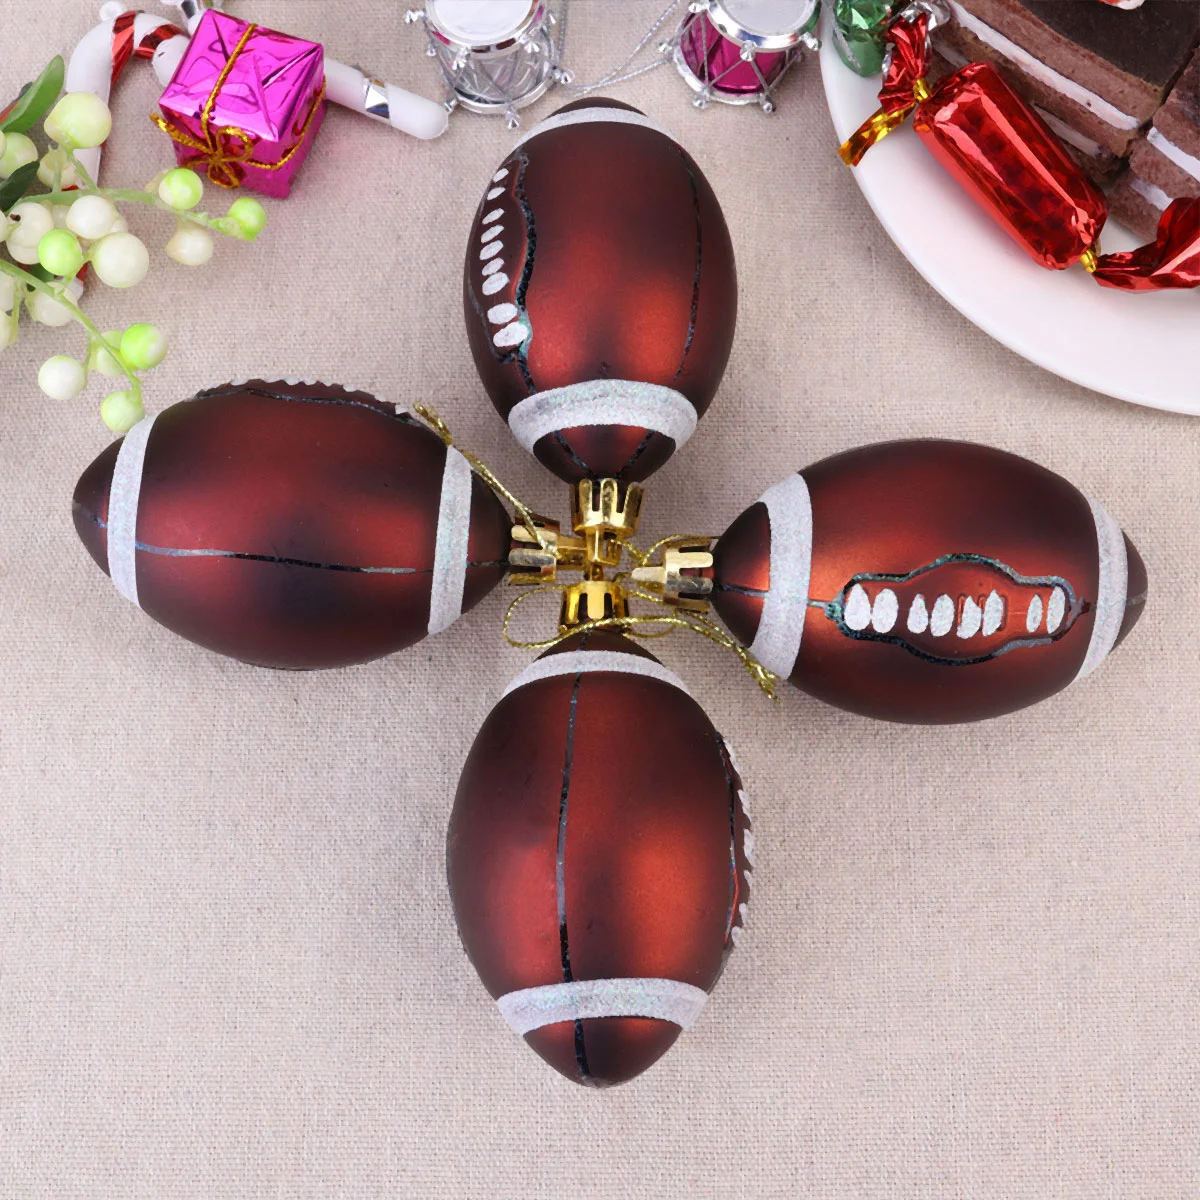 Christmas Tree Ornaments Hanging Basketball Decorations Ornament Sports Party Shatterproof Decoration Baubles Football Baseball